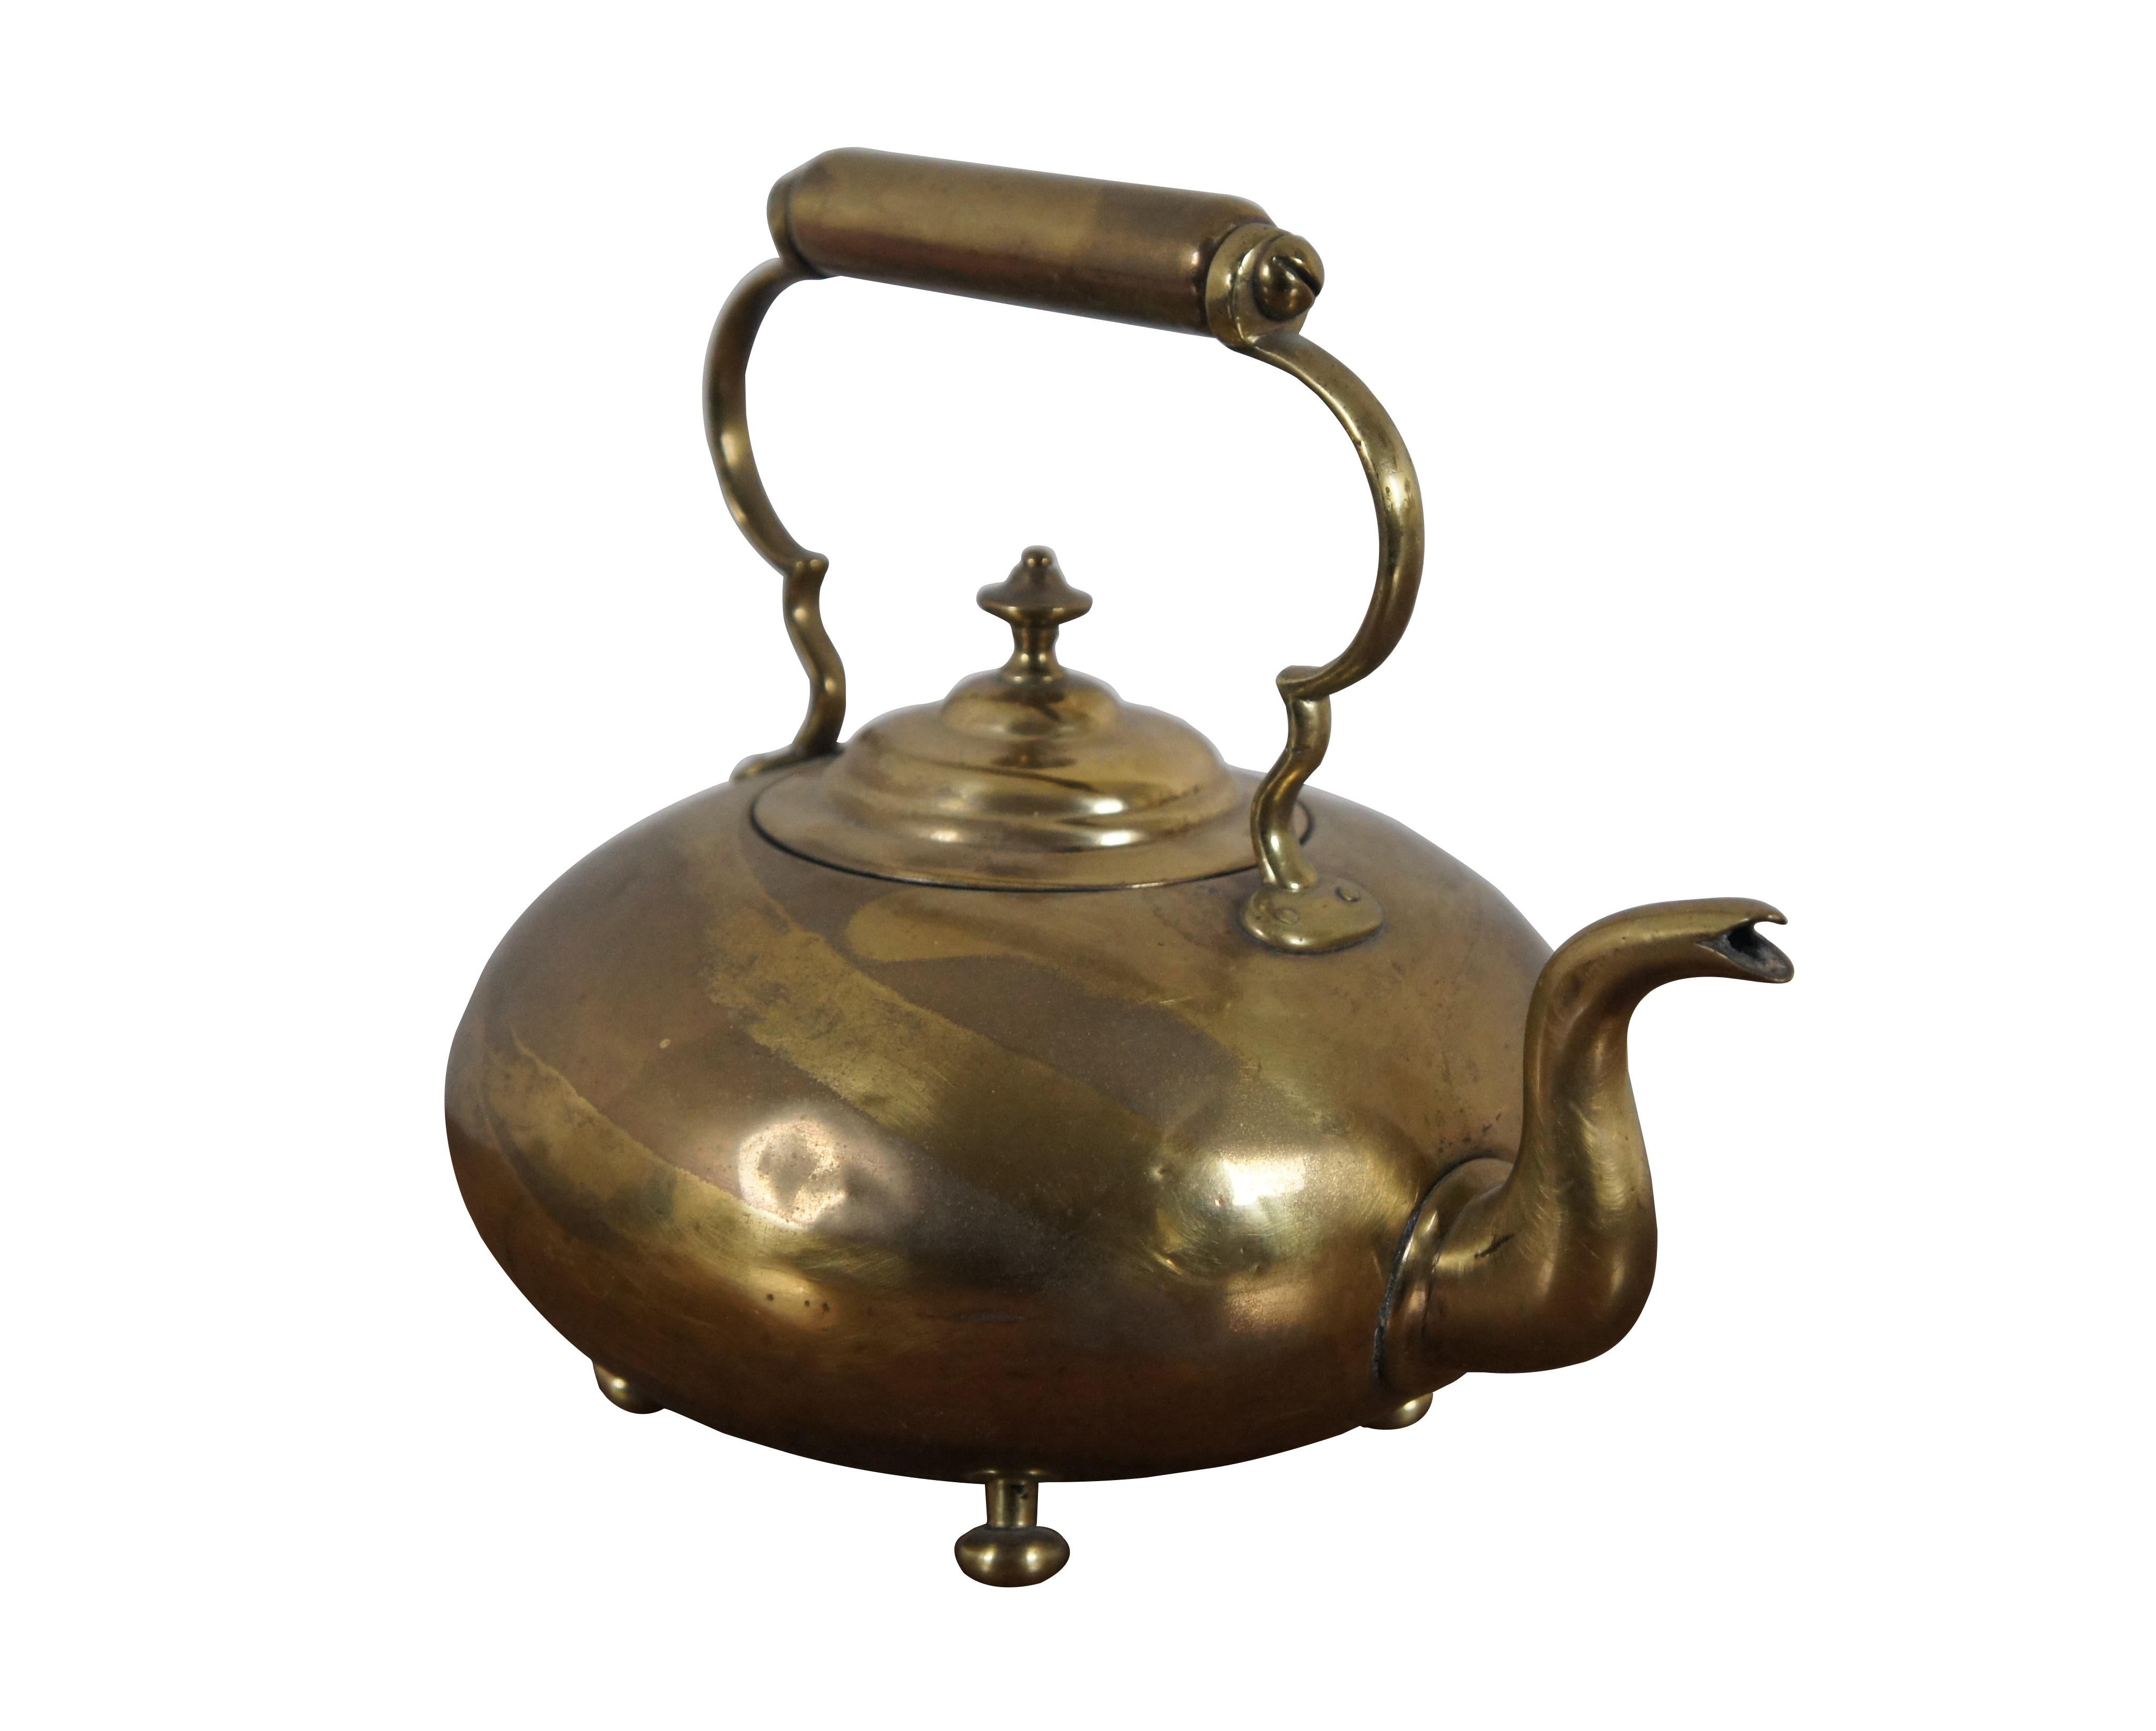 Antique Scottish brass Hot Toddy / tea / Coffee kettle with low round body, small goose neck terminating in a bird spout, four round mushroom shaped feet, top shaped finial lid, and fixed handle.

Dimensions:
9.5